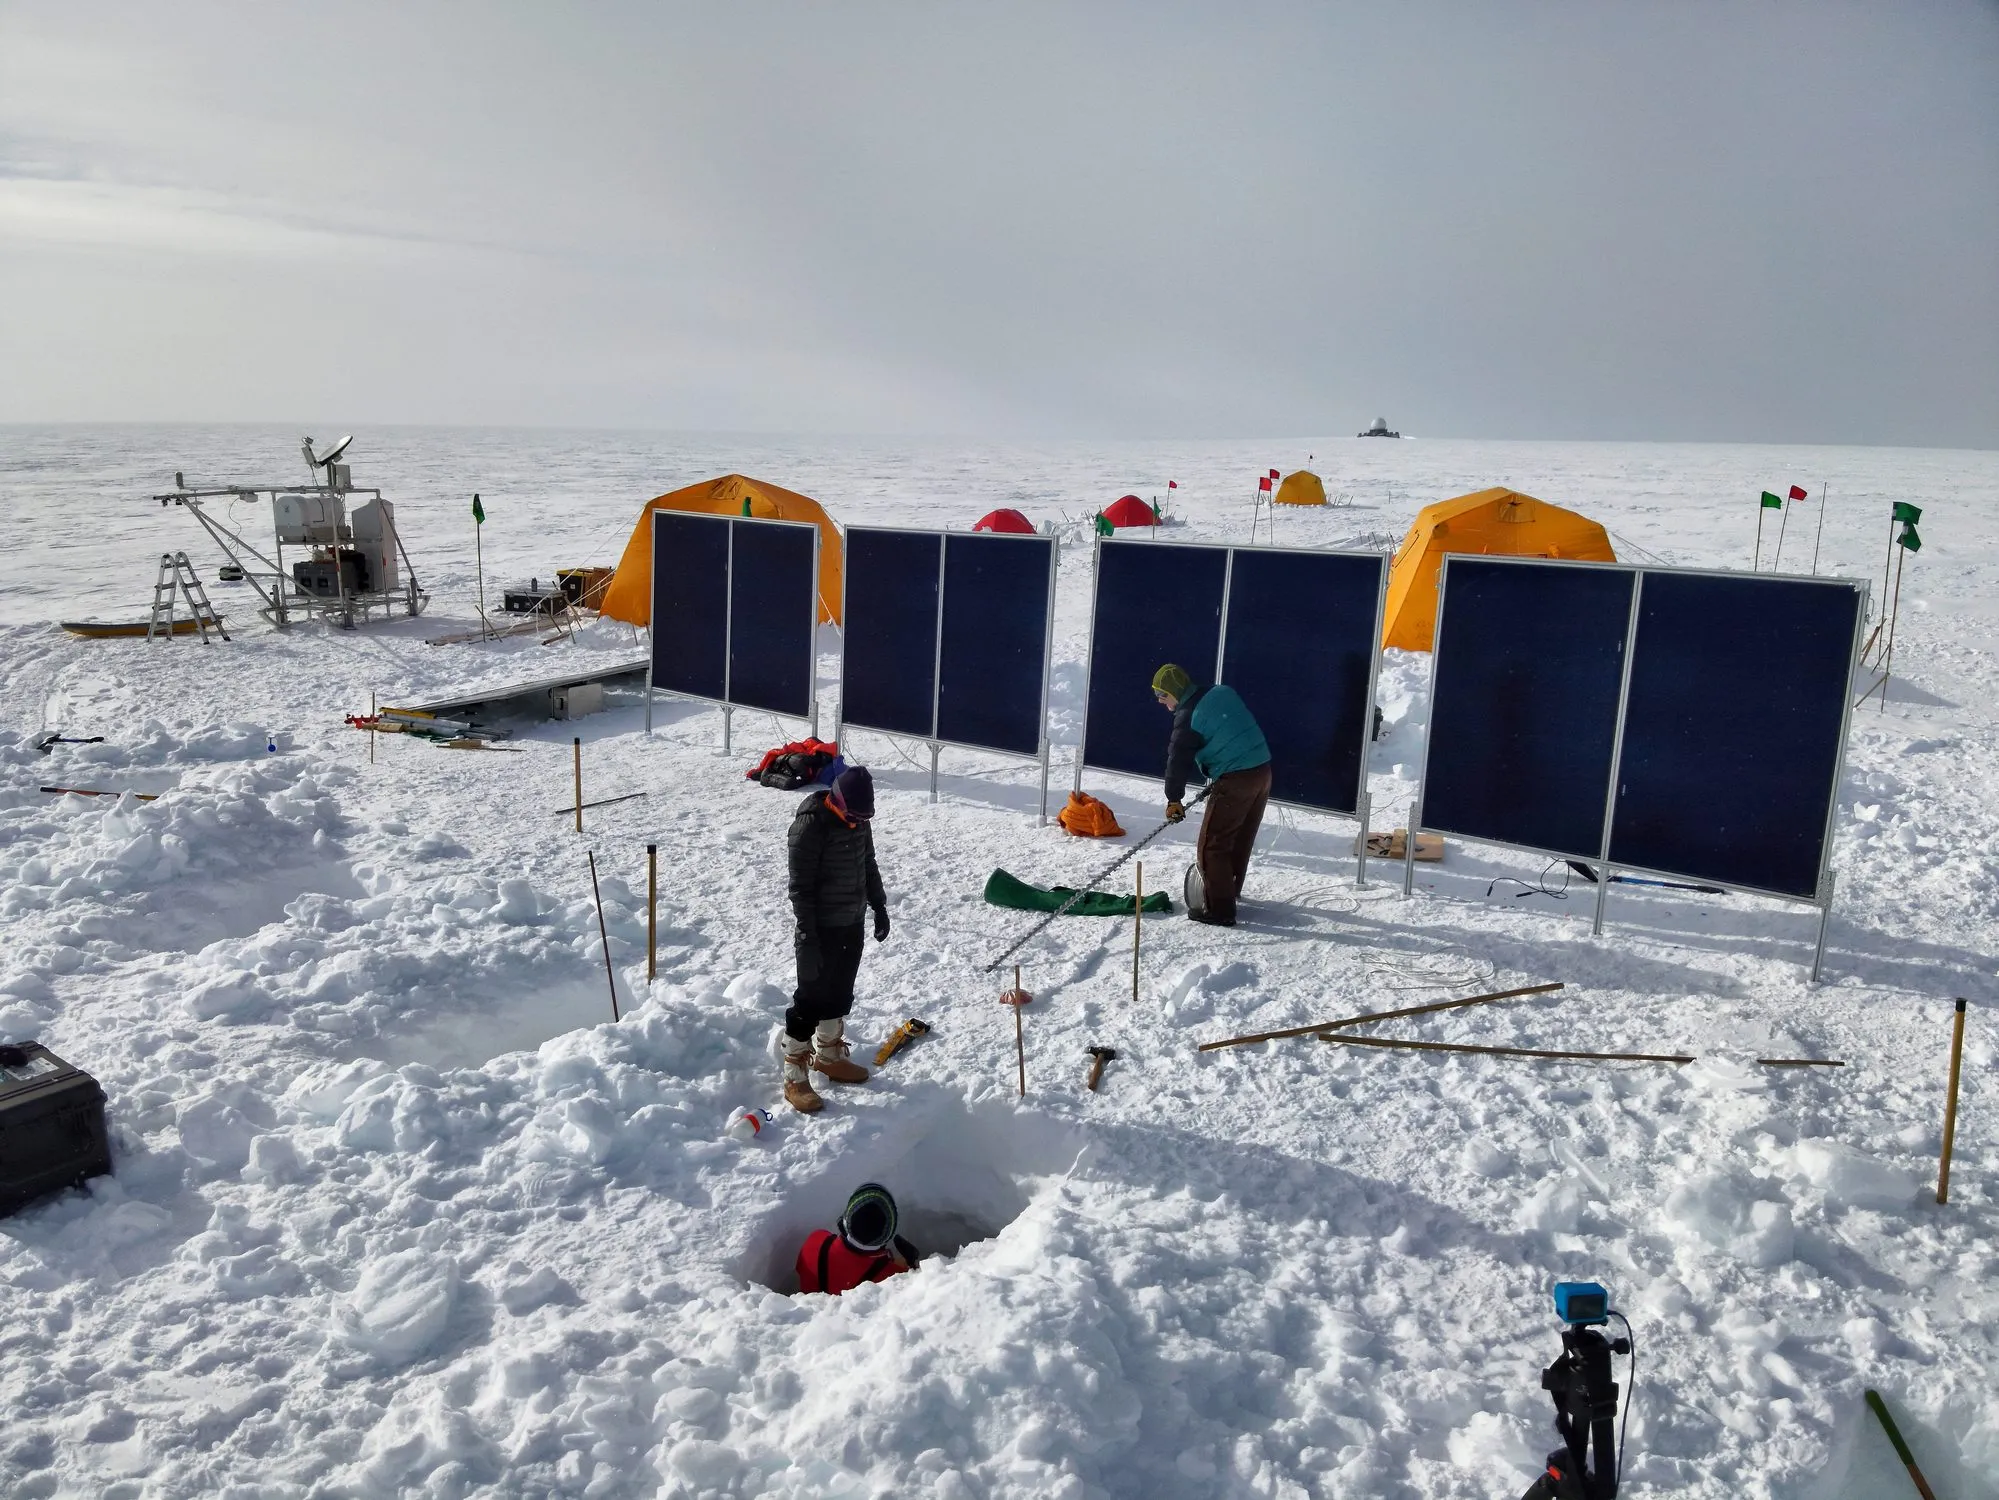 A view of the camp setup after digging in many anchors for the solar panels